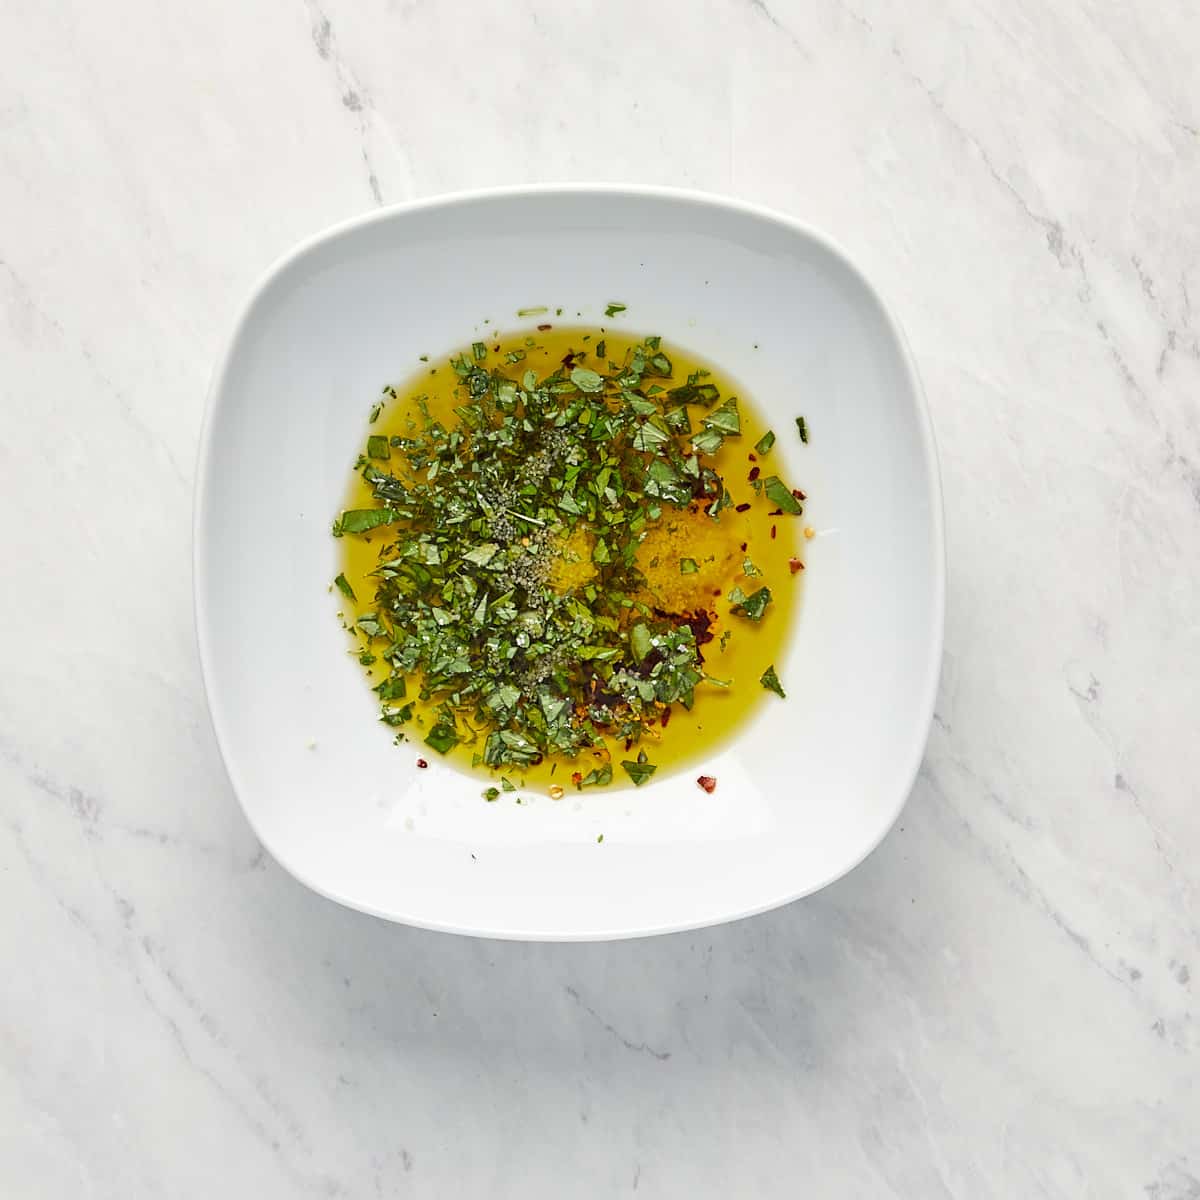 olive oil, basil, and spices in a bowl